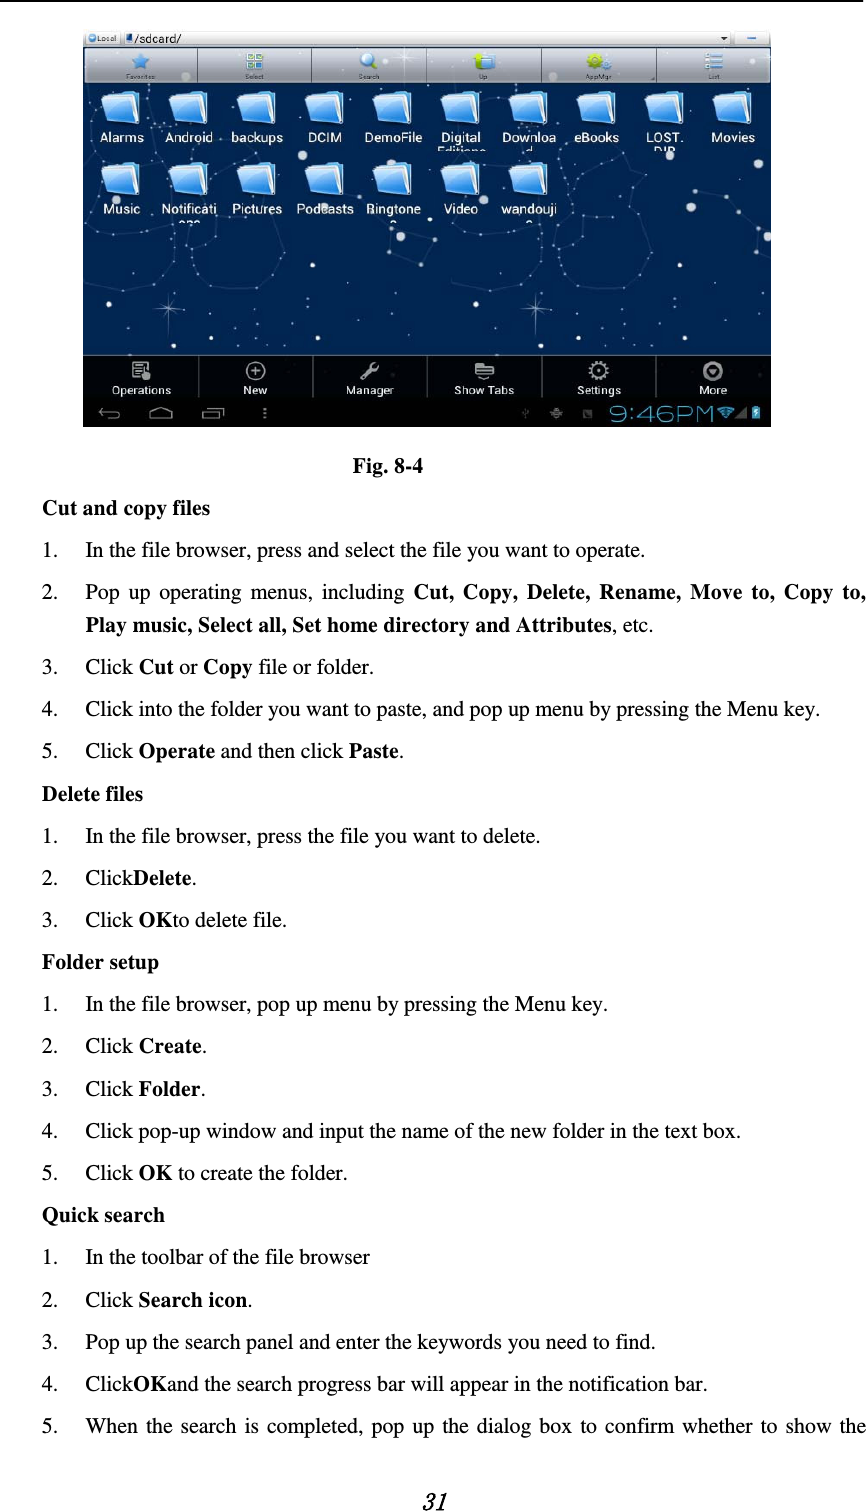    31  Fig. 8-4 Cut and copy files 1. In the file browser, press and select the file you want to operate. 2. Pop up operating menus, including Cut, Copy, Delete, Rename, Move to, Copy to, Play music, Select all, Set home directory and Attributes, etc.   3. Click Cut or Copy file or folder.   4. Click into the folder you want to paste, and pop up menu by pressing the Menu key. 5. Click Operate and then click Paste.   Delete files 1. In the file browser, press the file you want to delete. 2. ClickDelete.   3. Click OKto delete file. Folder setup 1. In the file browser, pop up menu by pressing the Menu key. 2. Click Create.   3. Click Folder.   4. Click pop-up window and input the name of the new folder in the text box. 5. Click OK to create the folder. Quick search 1. In the toolbar of the file browser 2. Click Search icon. 3. Pop up the search panel and enter the keywords you need to find. 4. ClickOKand the search progress bar will appear in the notification bar. 5. When the search is completed, pop up the dialog box to confirm whether to show the 